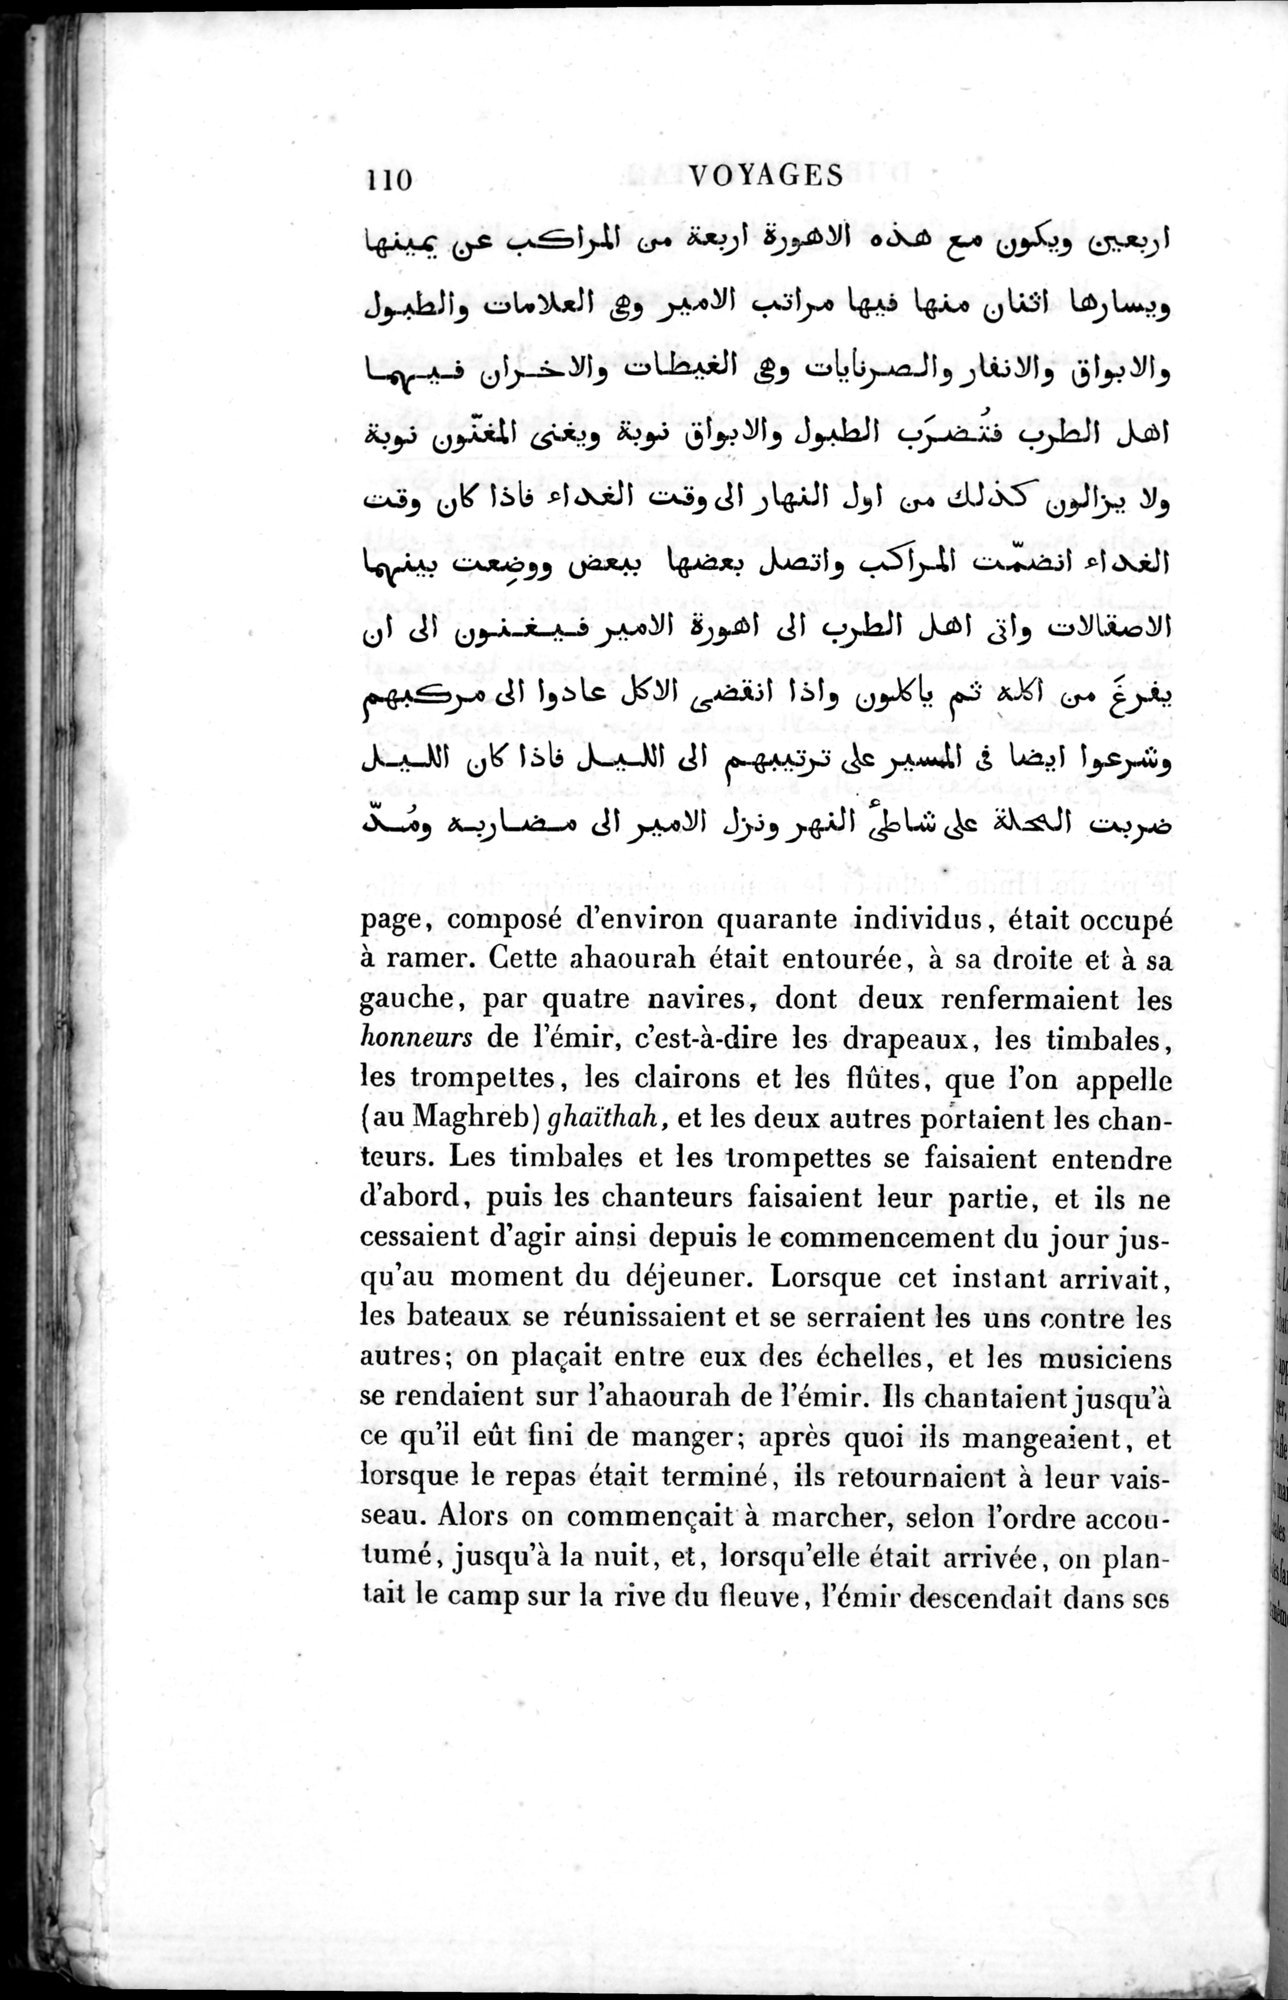 Voyages d'Ibn Batoutah : vol.3 / Page 150 (Grayscale High Resolution Image)